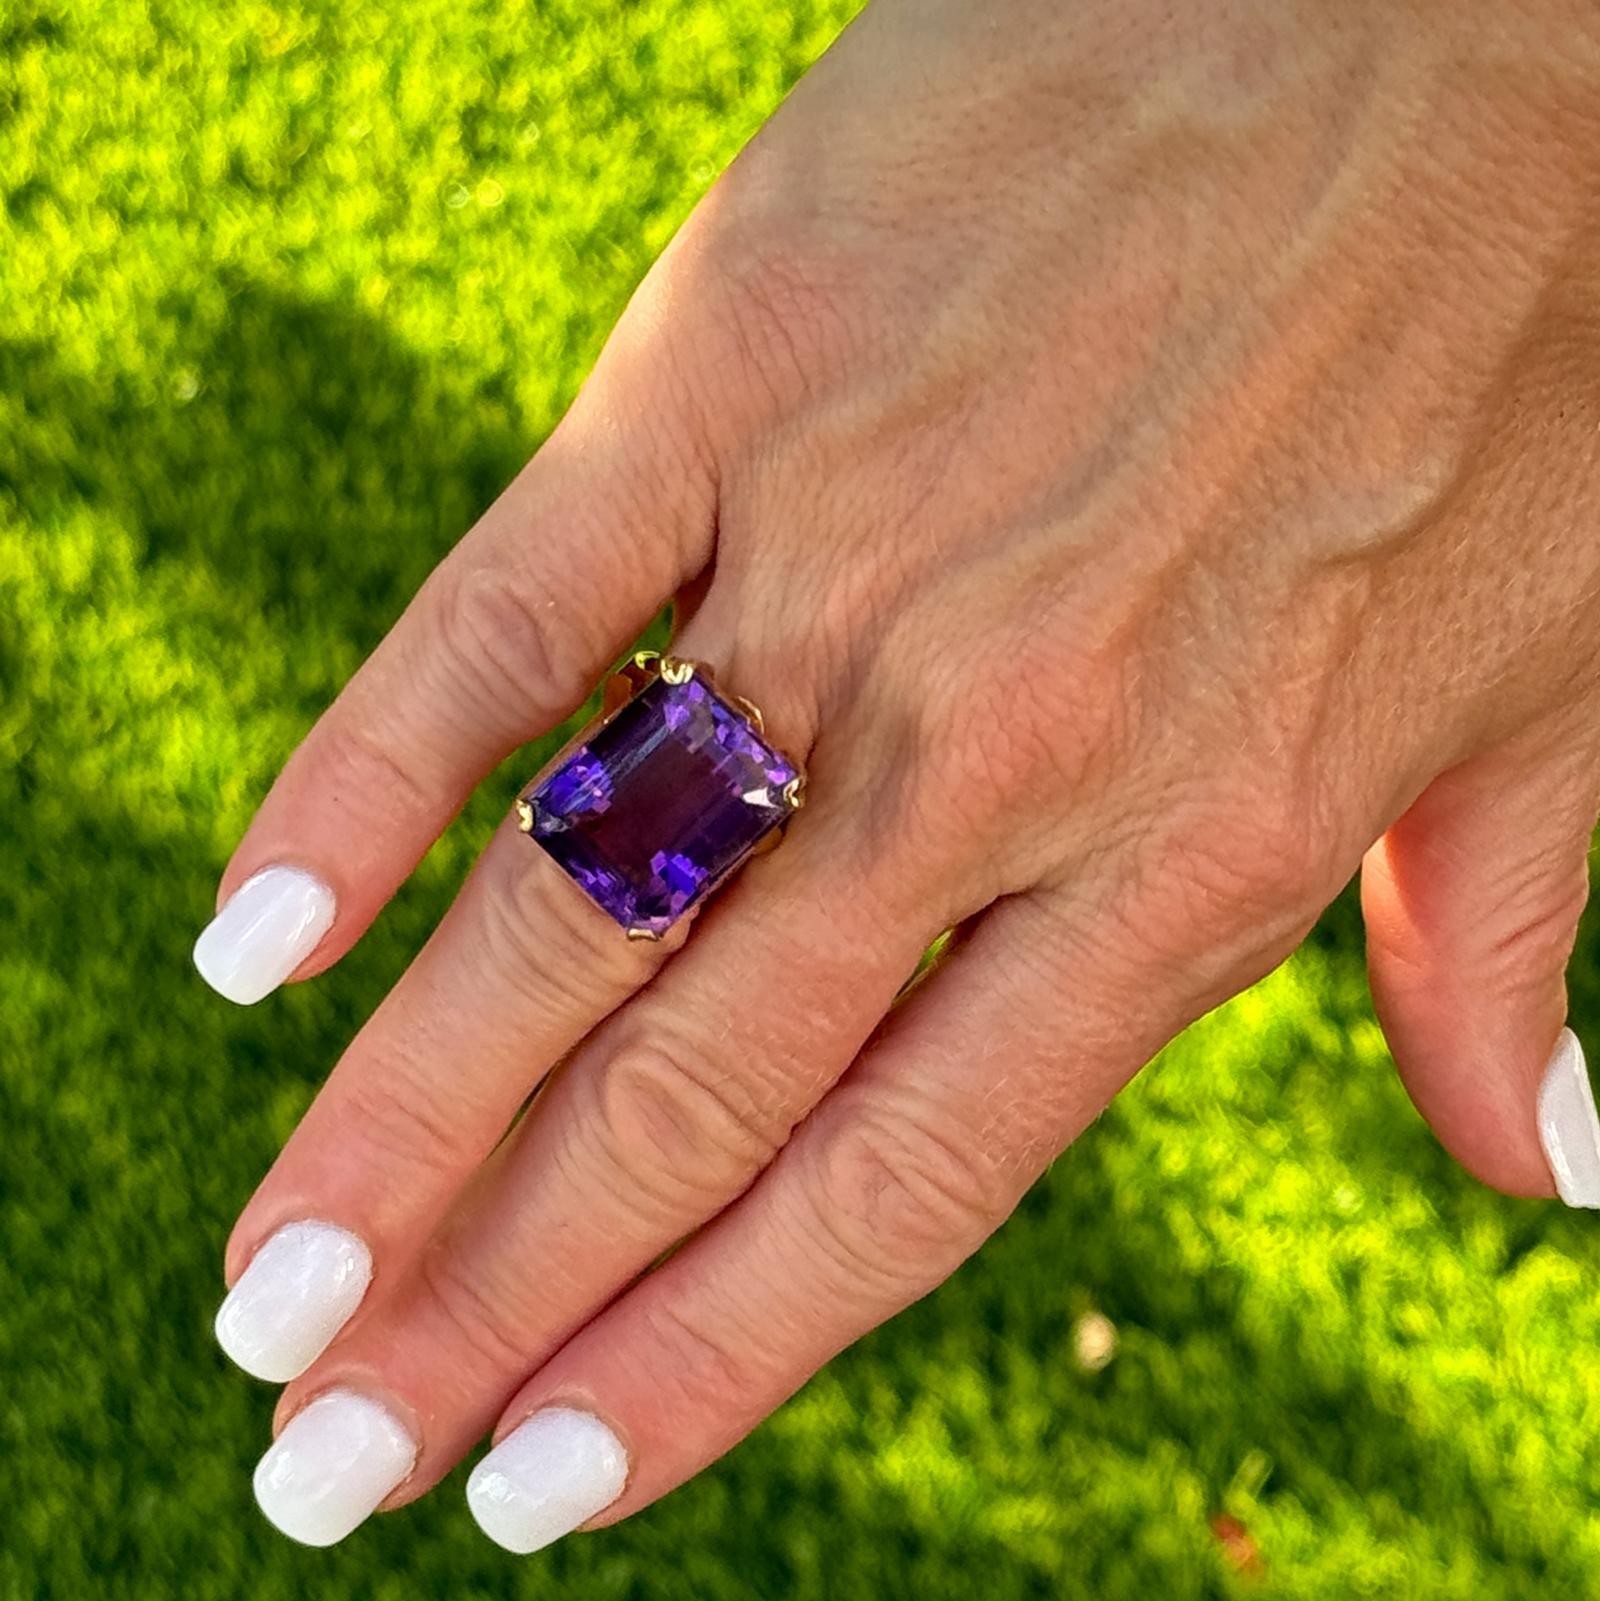 Vintage amethyst cocktail ring handcrafted in 18 karat yellow gold. The emerald cut natural purple amethyst gemstone weighs approximately 20 carats and is set in a beautiful vintage mounting. The ring measures 15 x 20mm and is currently size 6 (can